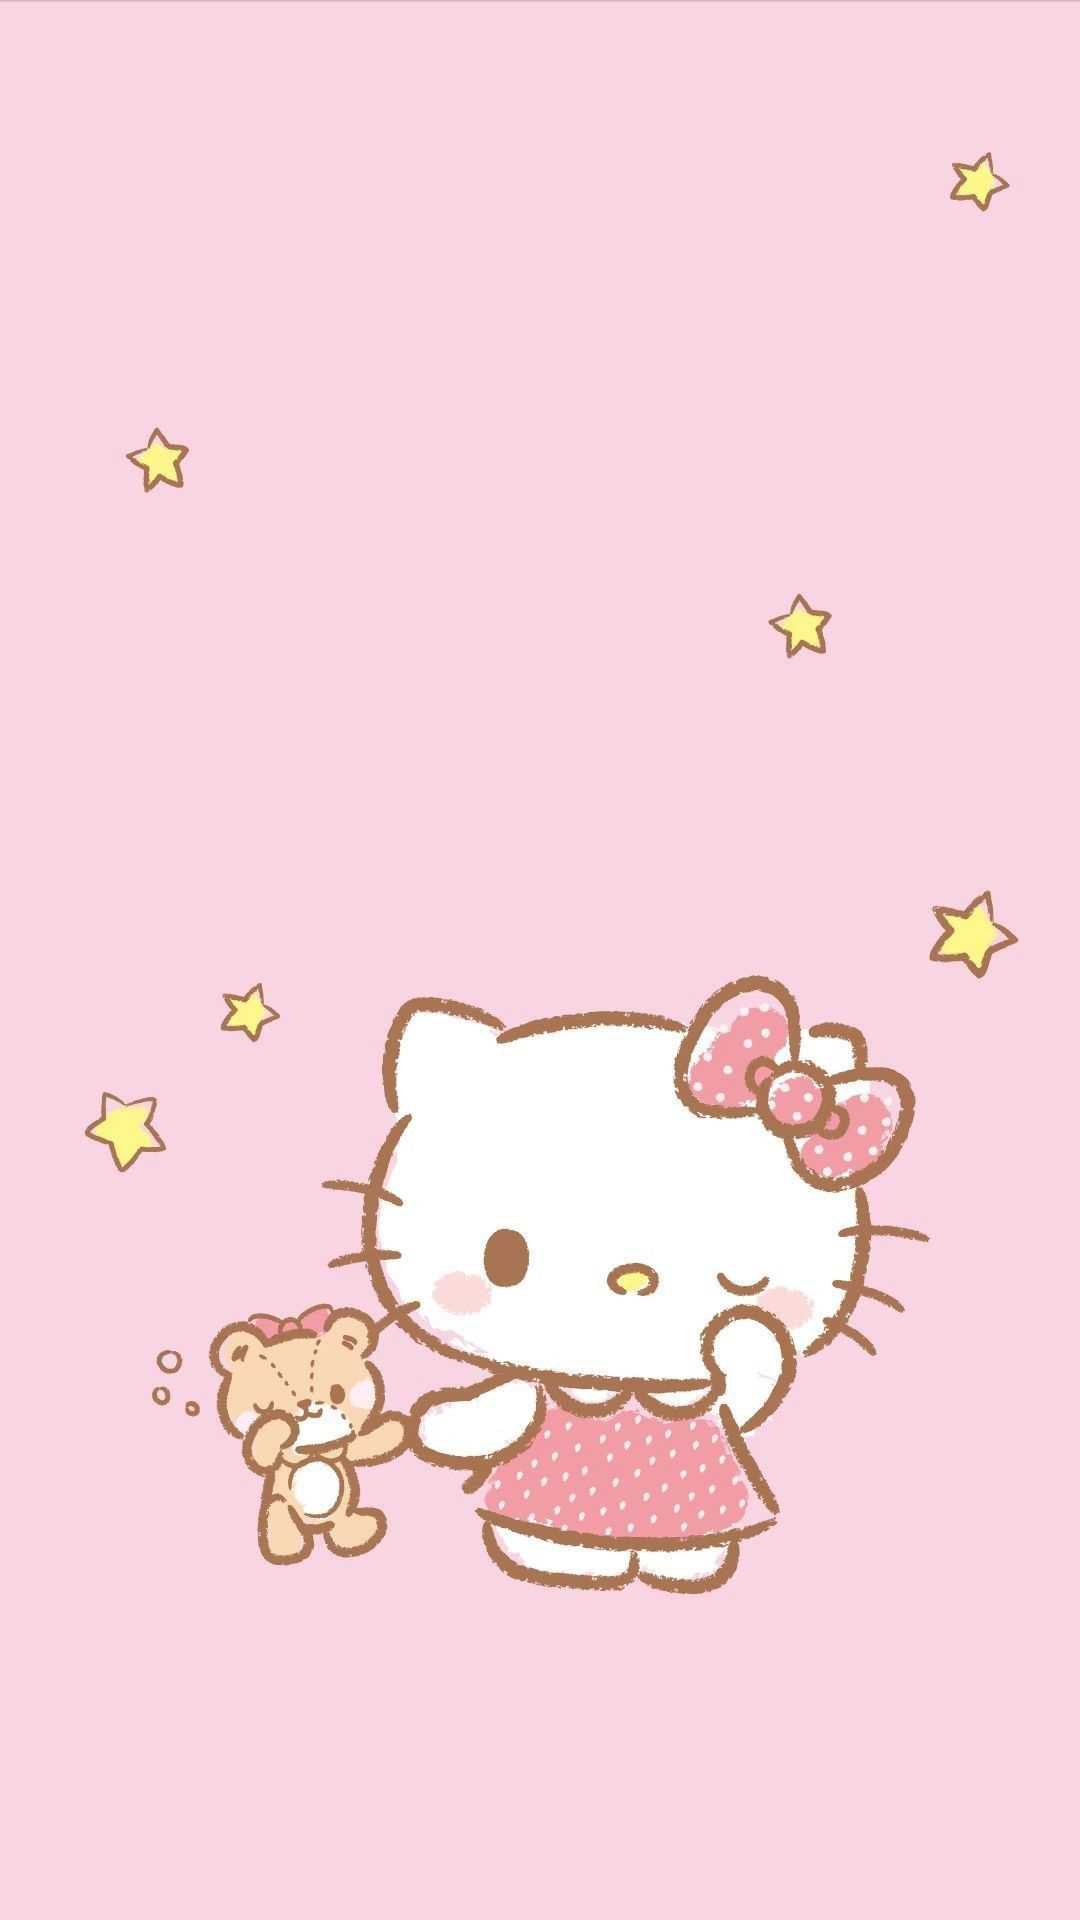 Hello Kitty iPhone Wallpaper with image resolution 1080x1920 pixel. You can make this wallpaper for your iPhone 5, 6, 7, 8, X backgrounds, Mobile Screensaver, or iPad Lock Screen - Hello Kitty, Sanrio